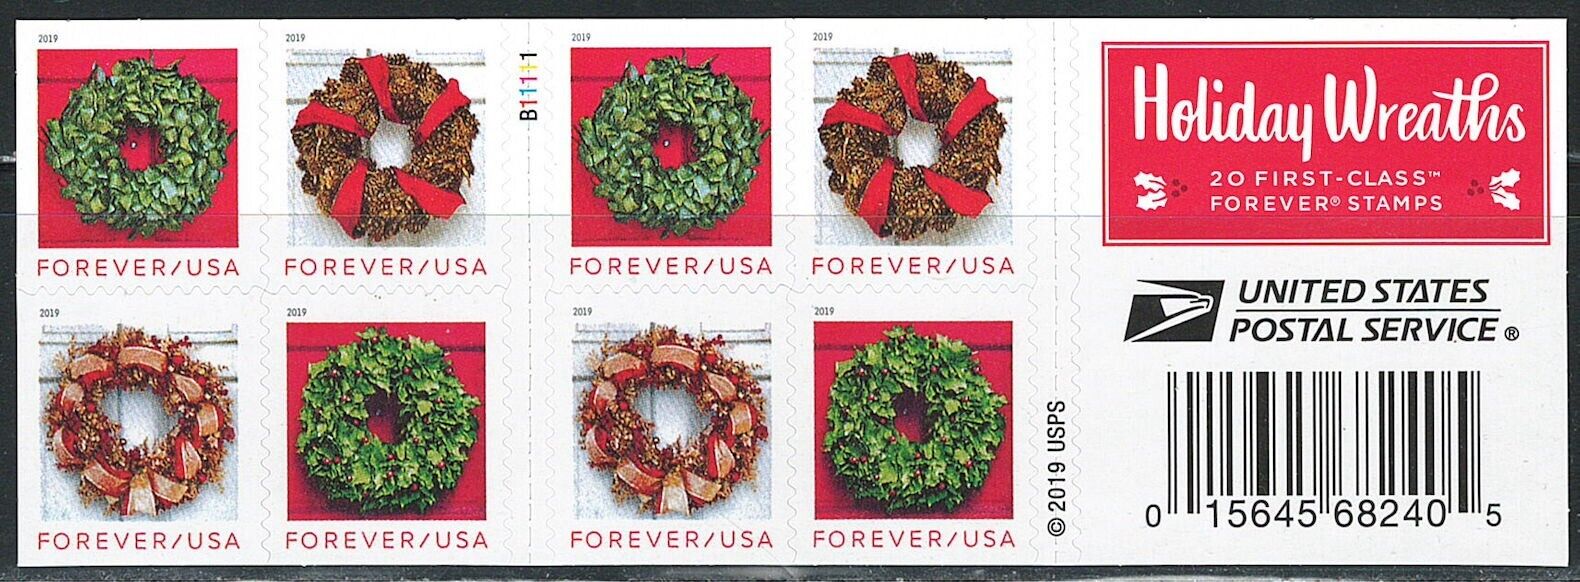 Mint US Holiday Wreaths Booklet Pane of 20 Forever Stamp Scott# 5427b (MNH)